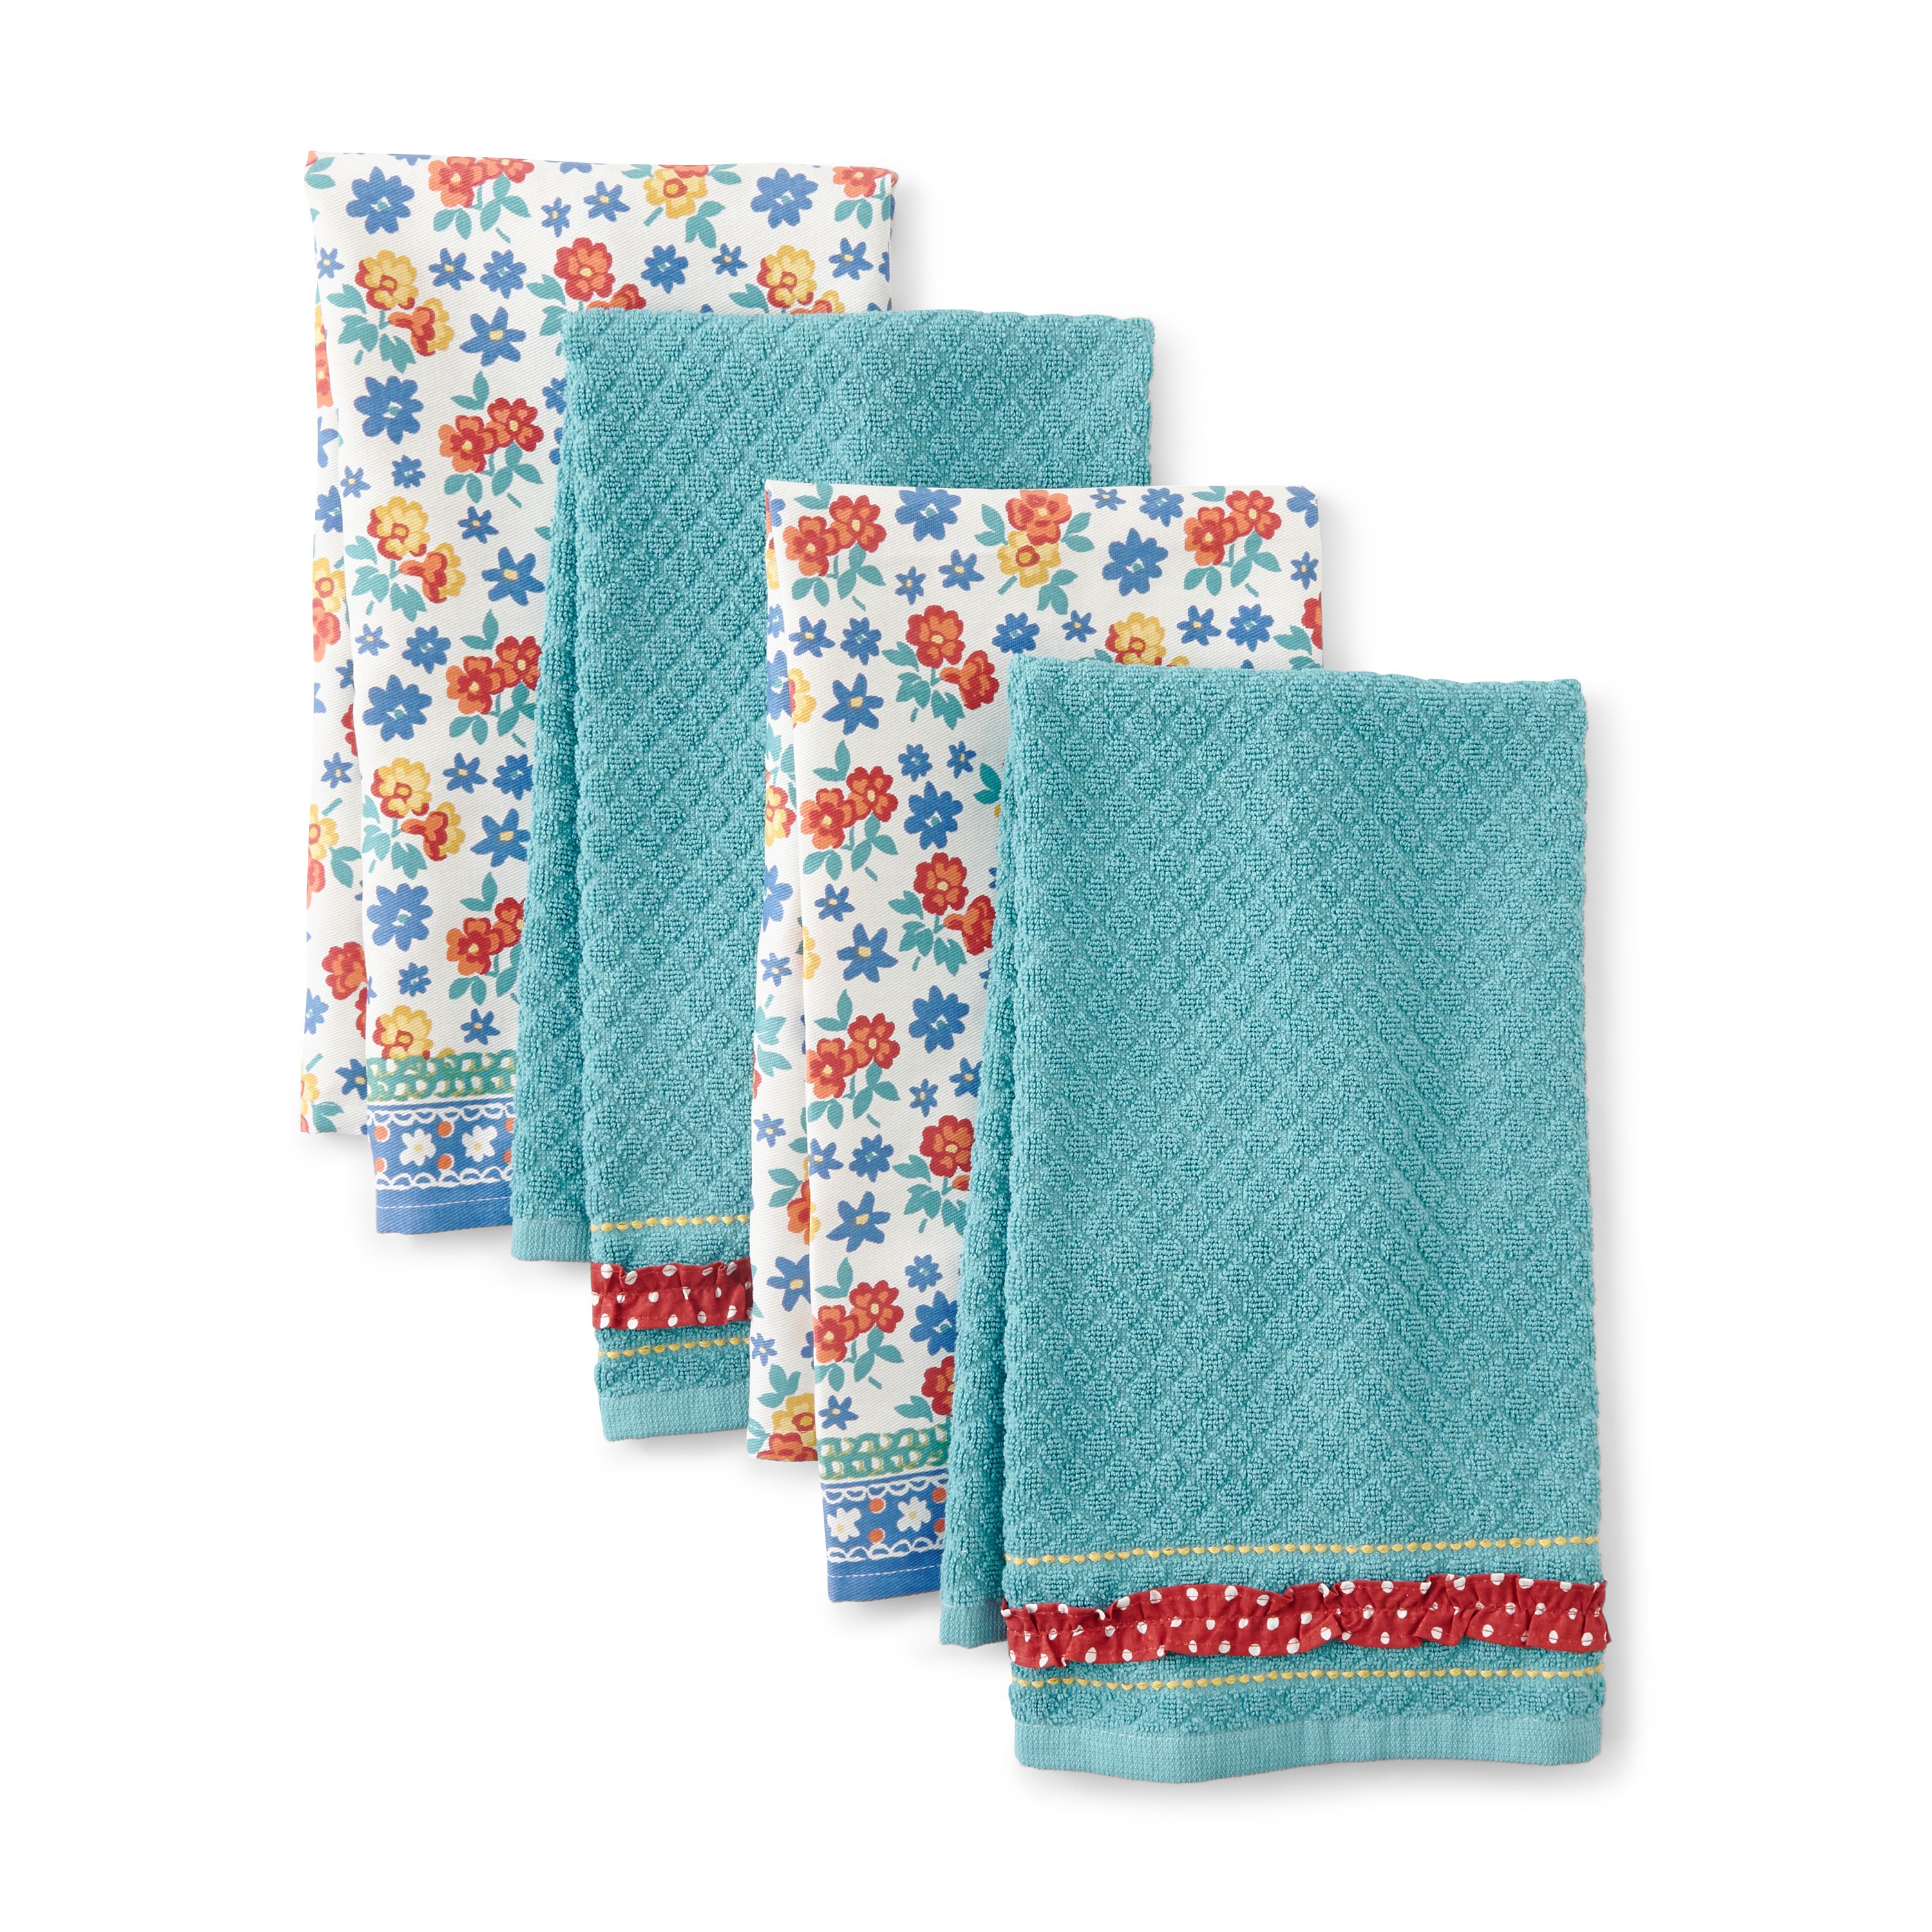 The Pioneer Woman Floral Kitchen Towel Set, Multicolor, 4 Piece - image 3 of 4